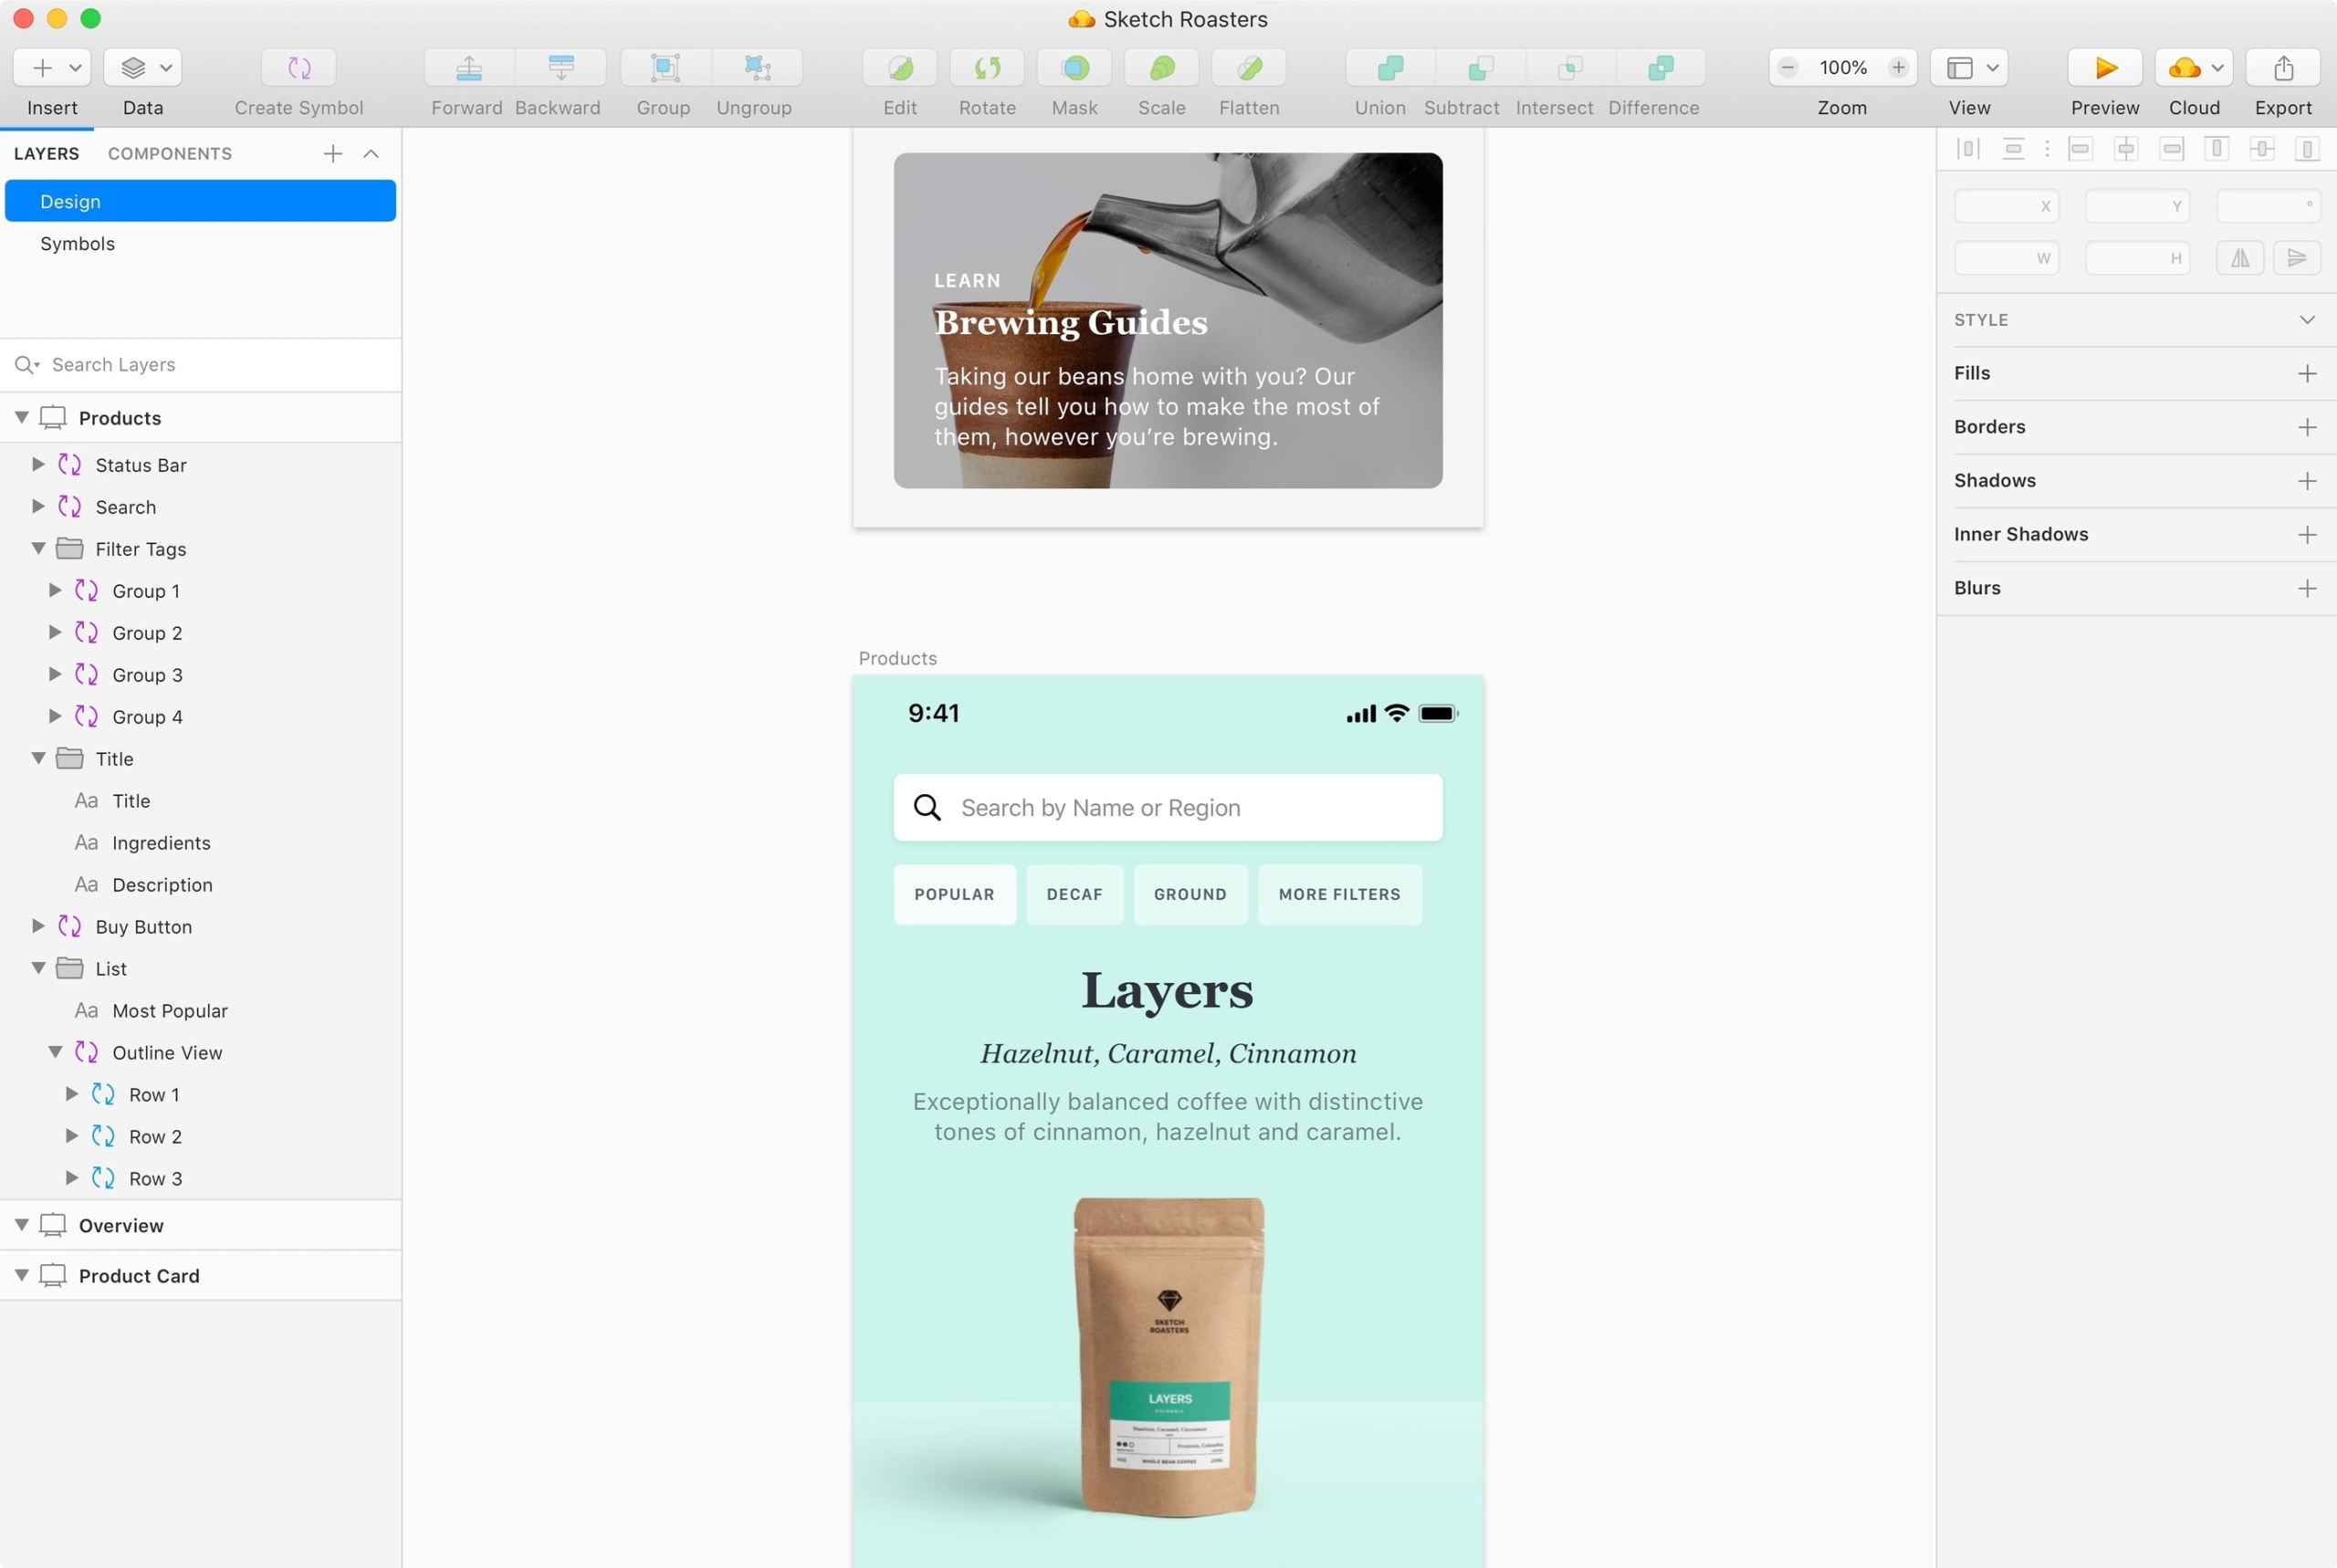 Sketch maker of popular design tools just landed 20 million in Series A  funding from Benchmark in its first outside round  TechCrunch